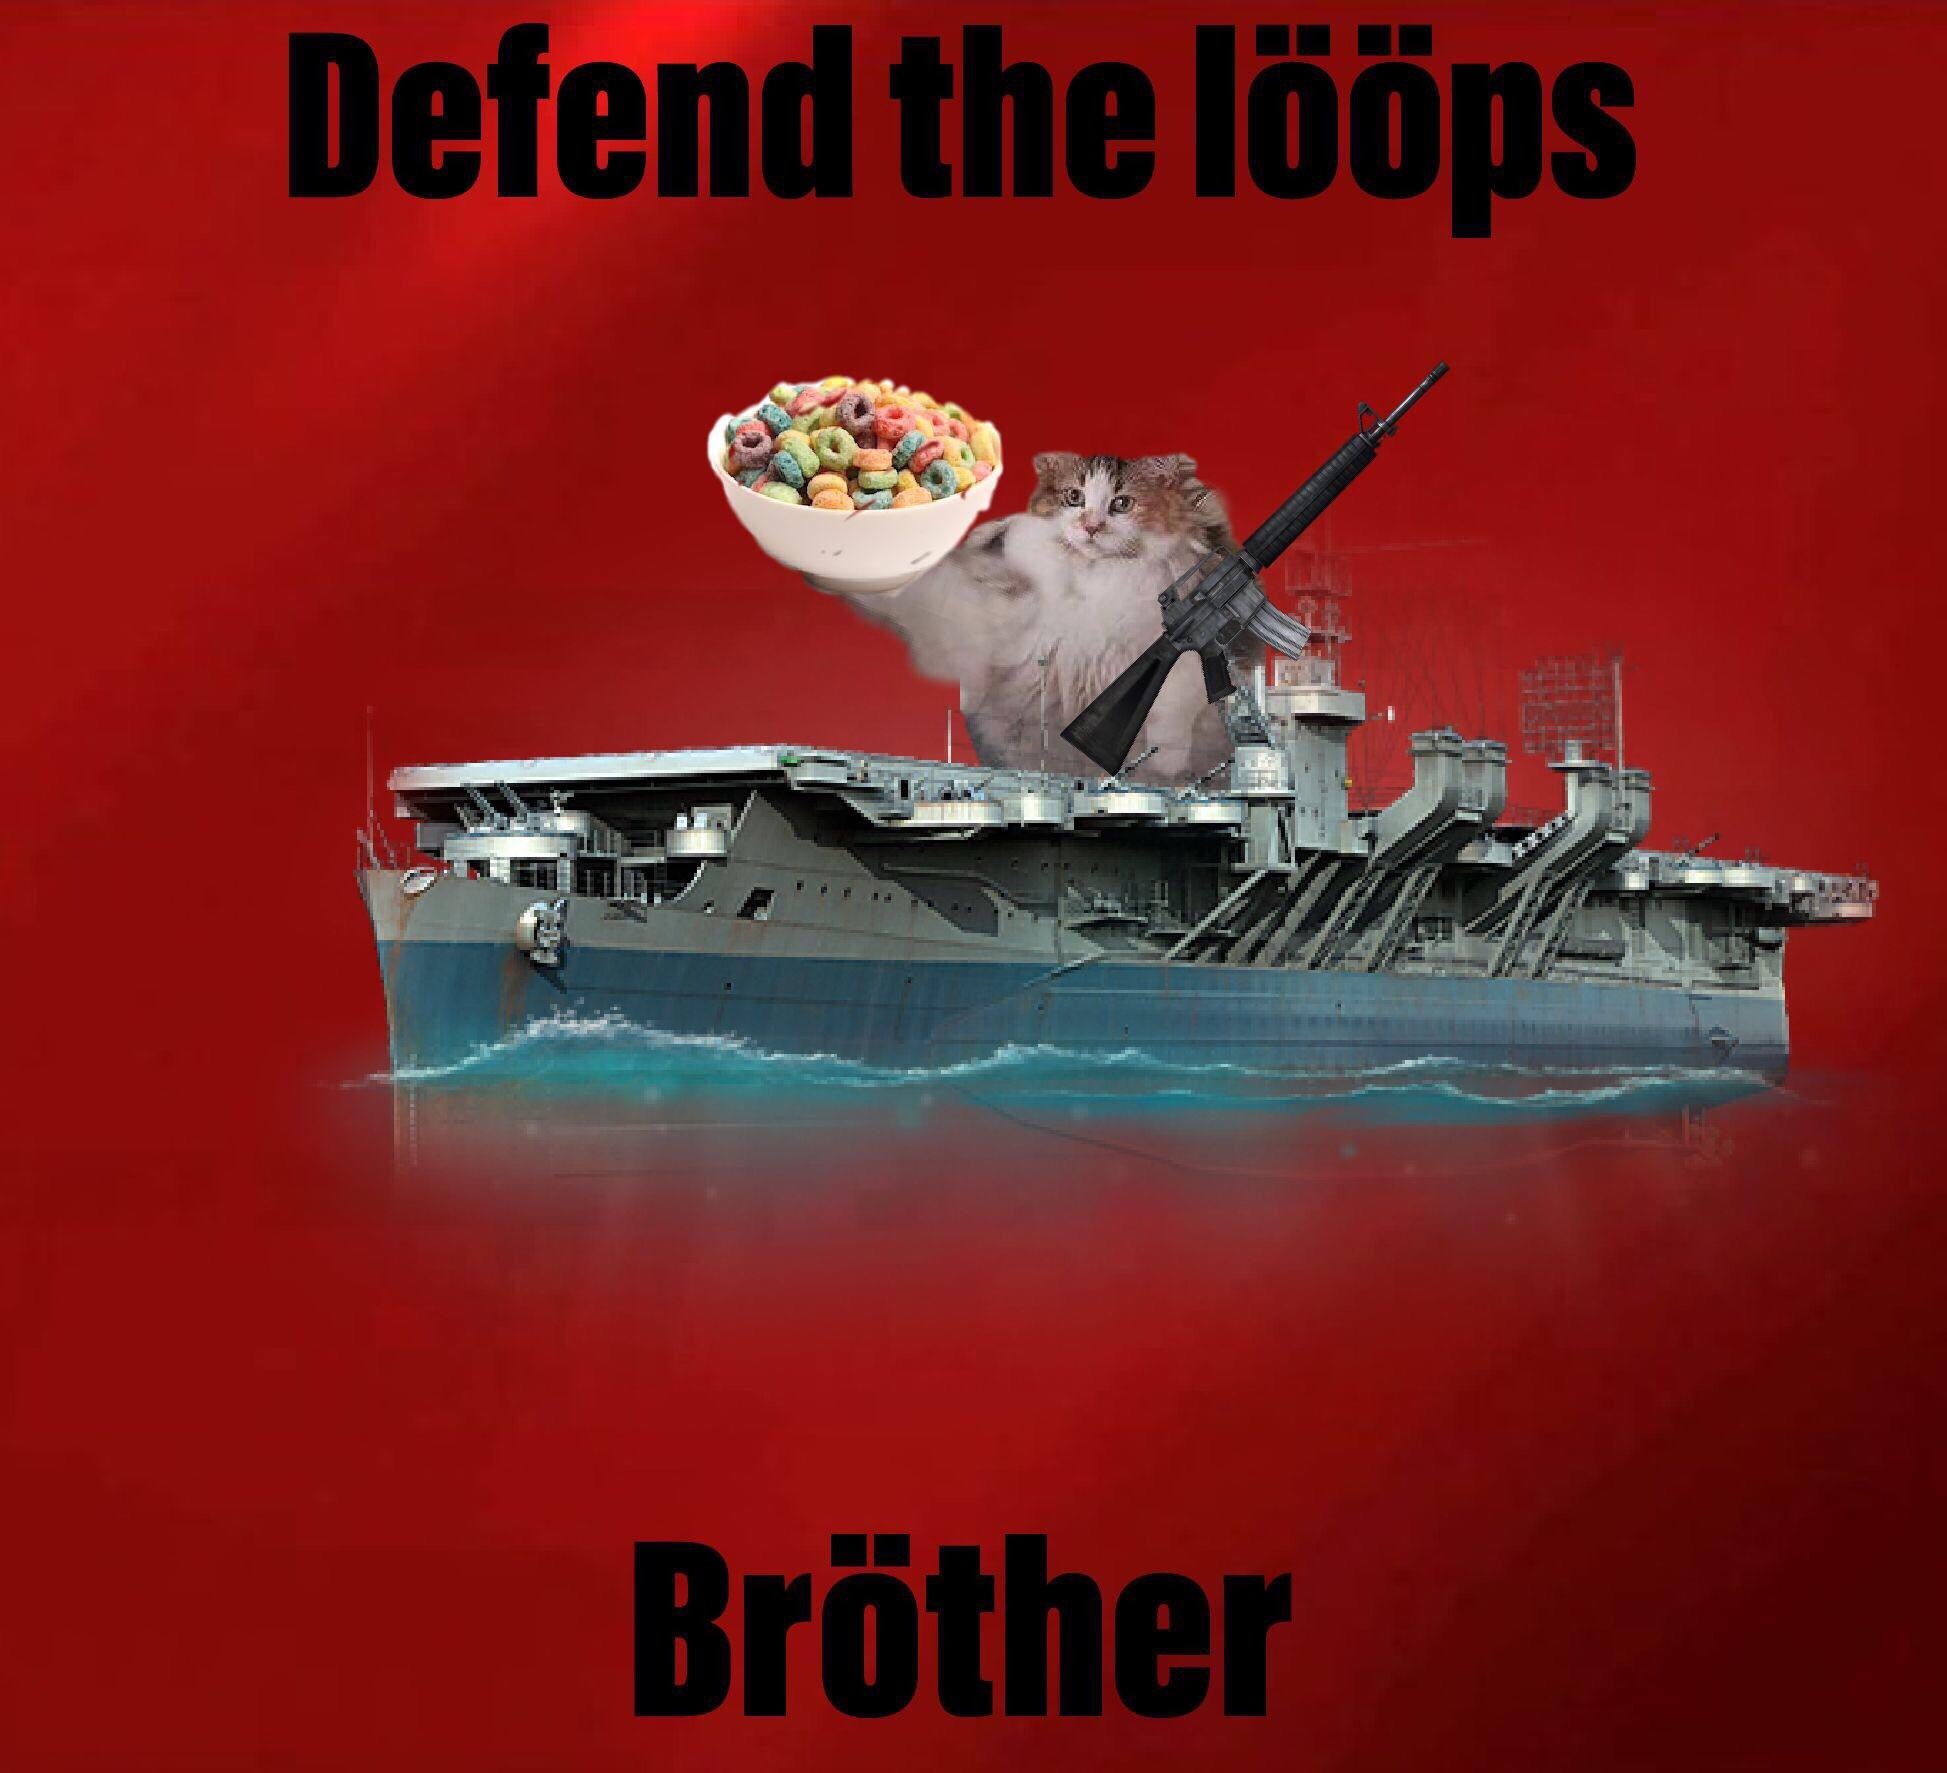 loops cat - poster - Defend the lps Brther